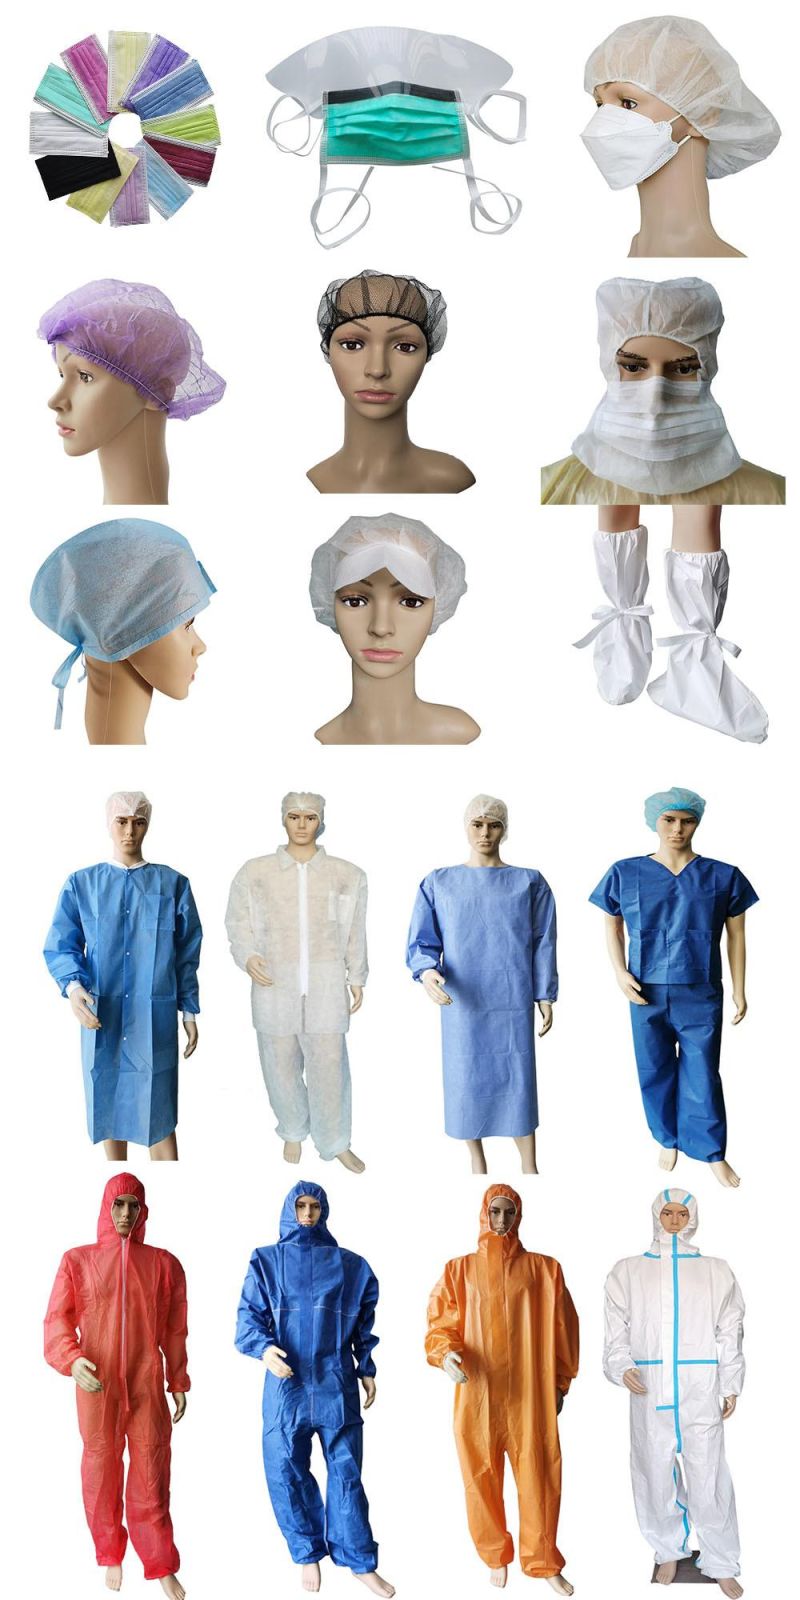 CE En 13795 Eo Sterilization Ultrasonic Heat Sealing SMS Sterile Surgeons Gowns Nonwoven Disposable Hospital Operation Medical Surgical Gown Surgical Robes